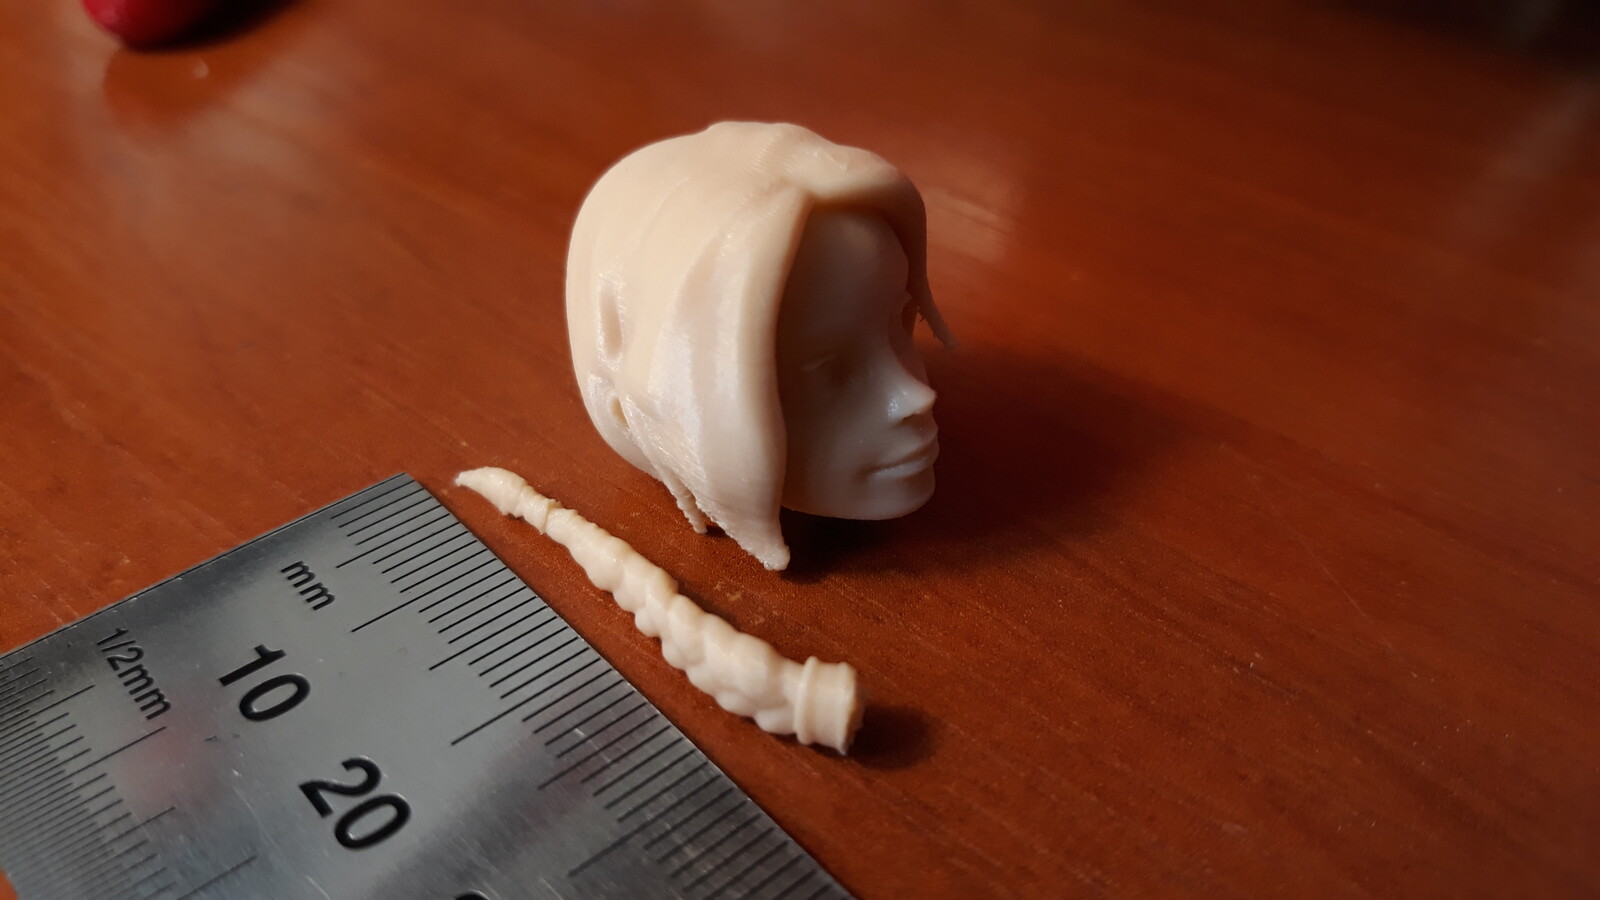 3D Printed small figurine test.
Yes, it will be available for 3D Printing too ;)